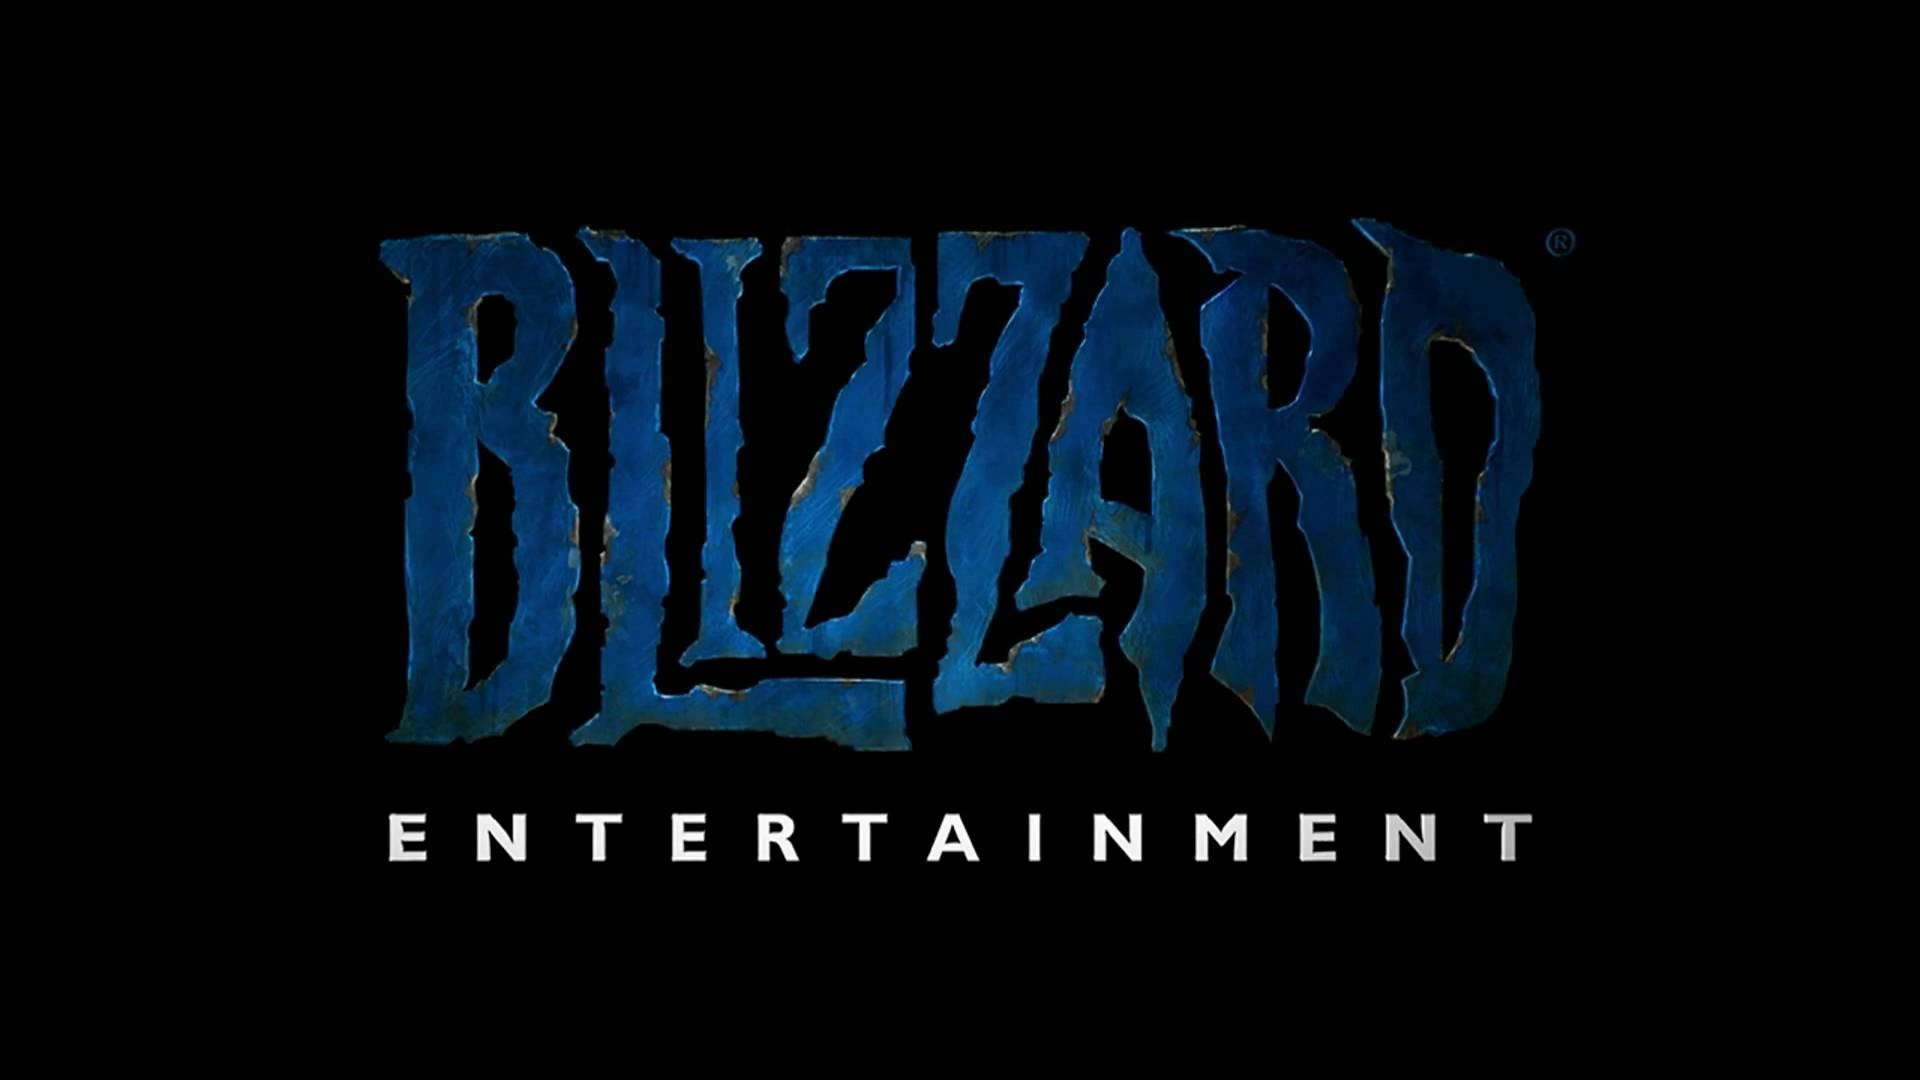 Blizzard entertainment hd papers and backgrounds